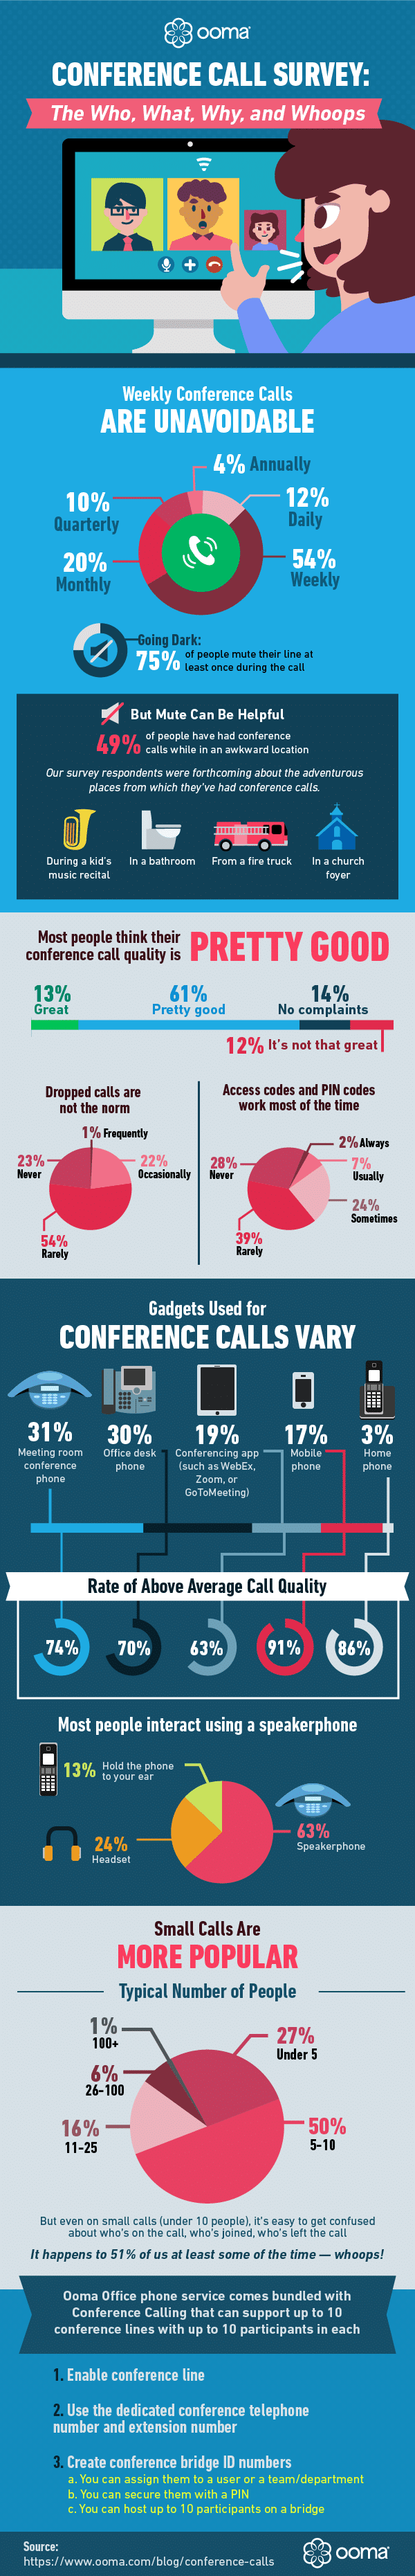 Conference Calls Guide Business Infographic